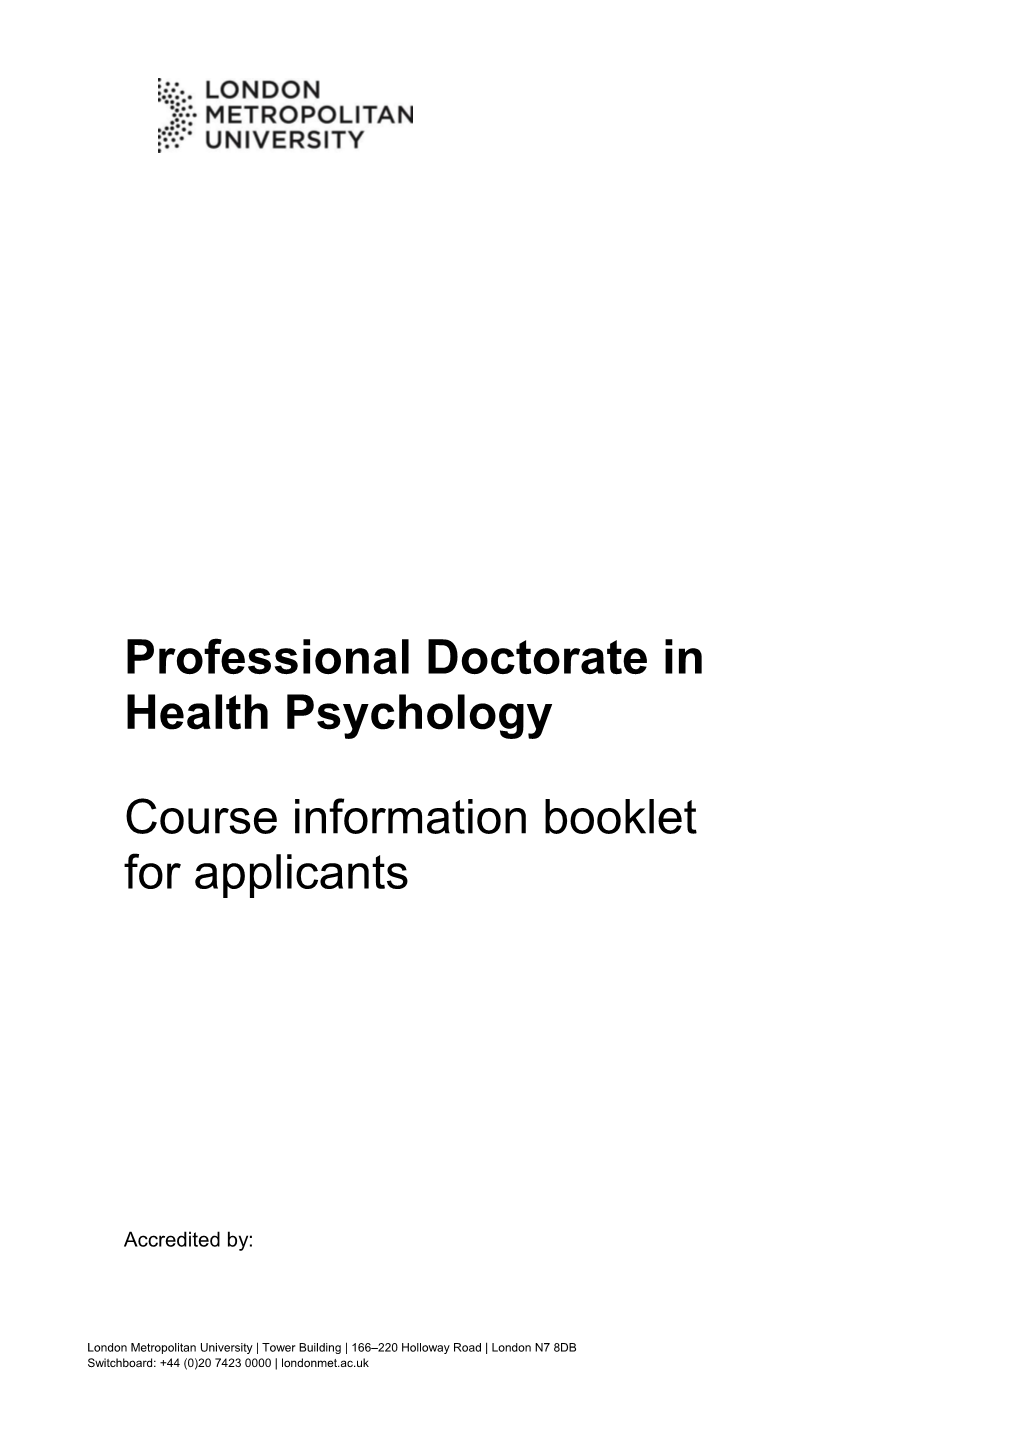 Professional Doctorate in Health Psychology